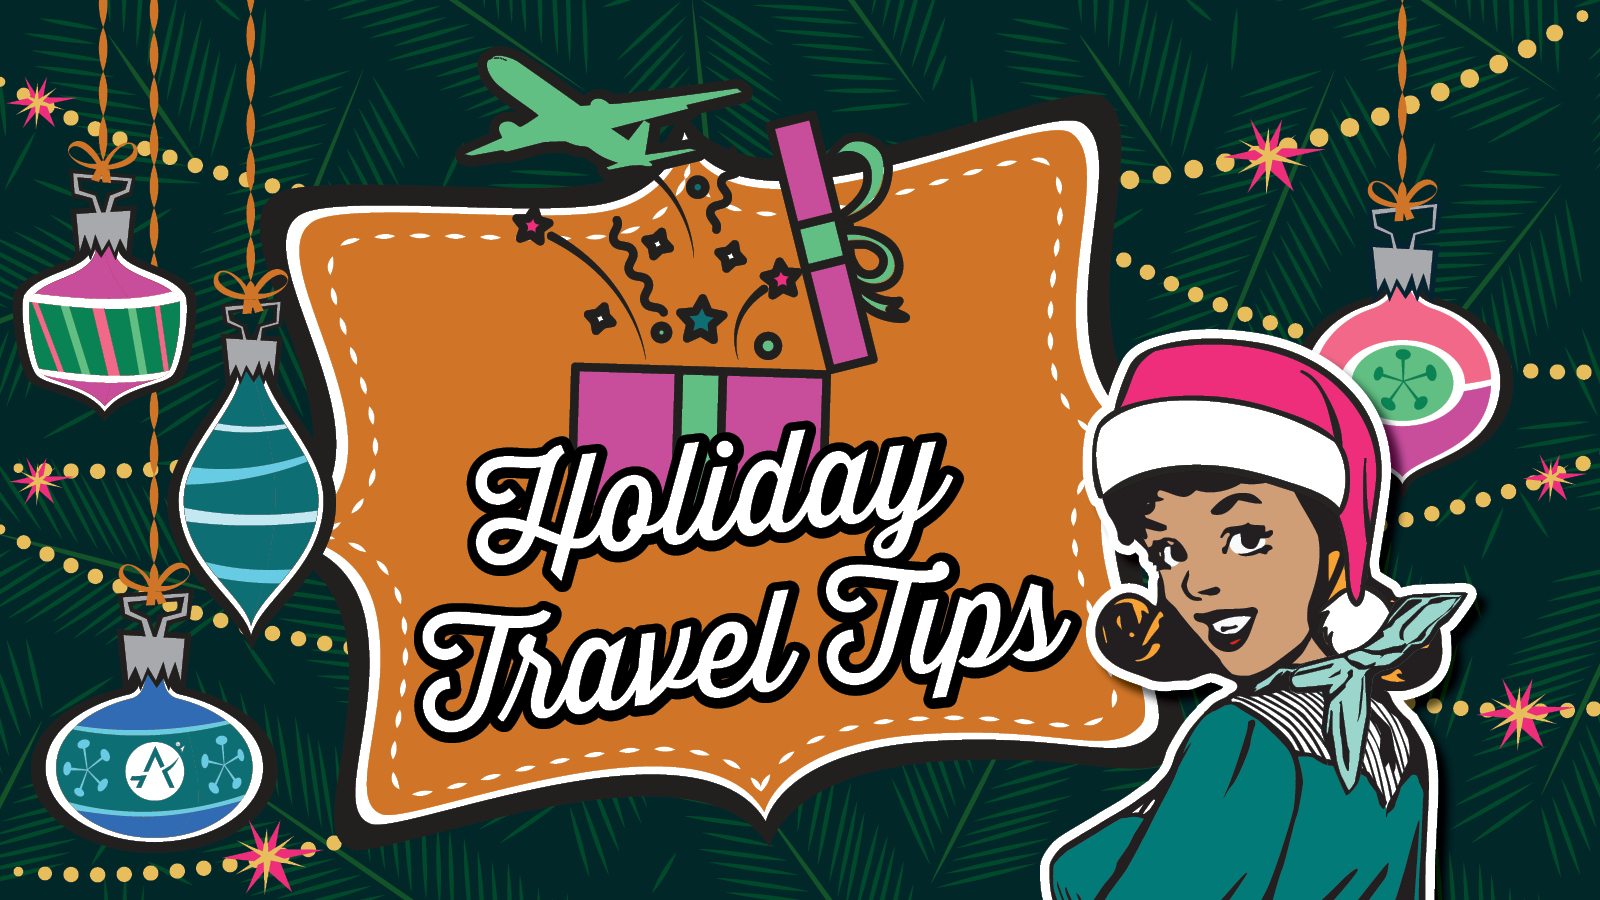 The AUS Betty Sue character is smiling with a Santa hat on her head; there are ornaments and gift illustrations in the background. Text reads: Holiday travel tips